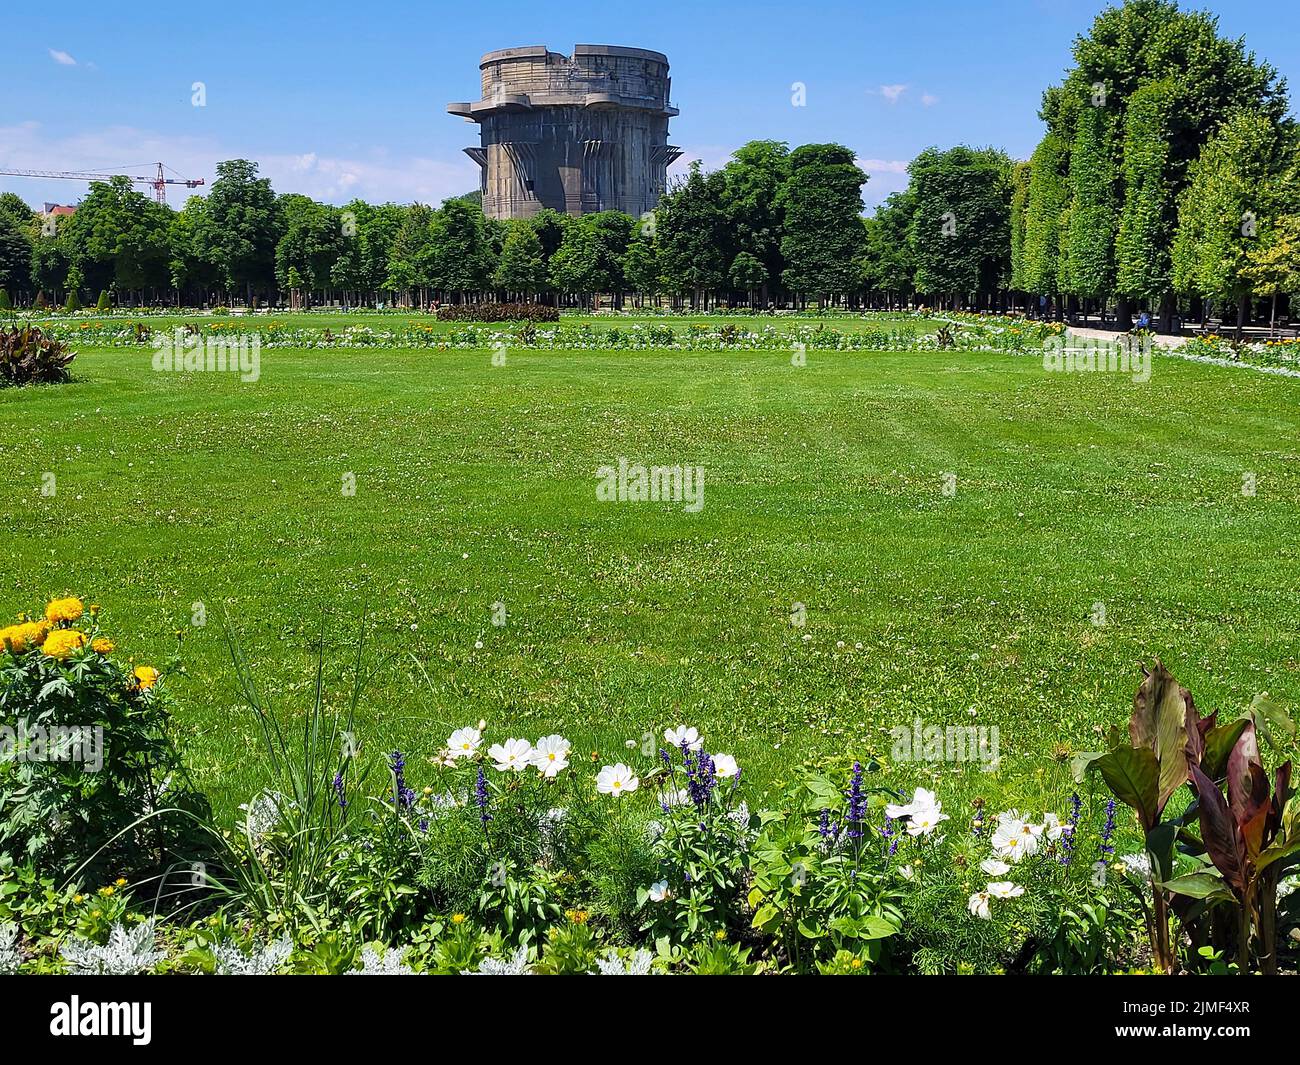 Austria, the public Augarten Park with one of the two flak towers from World War II, a green oasis in the 2nd district of Vienna, home of the Vienna B Stock Photo